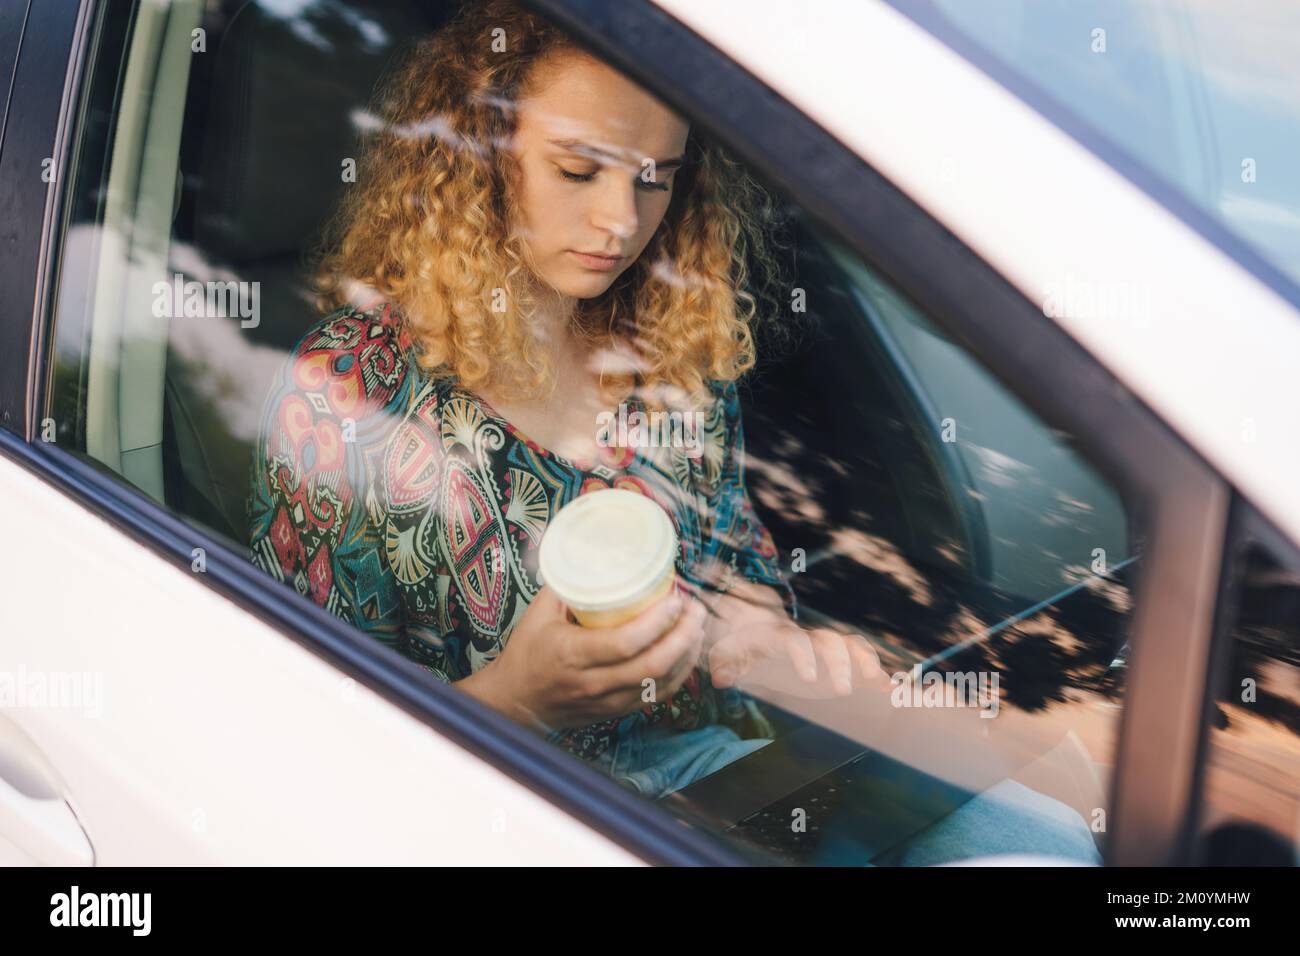 Young business woman sitting in the car drinking coffee and texting on a laptop. View from car window. Business people lifestyle. Stock Photo